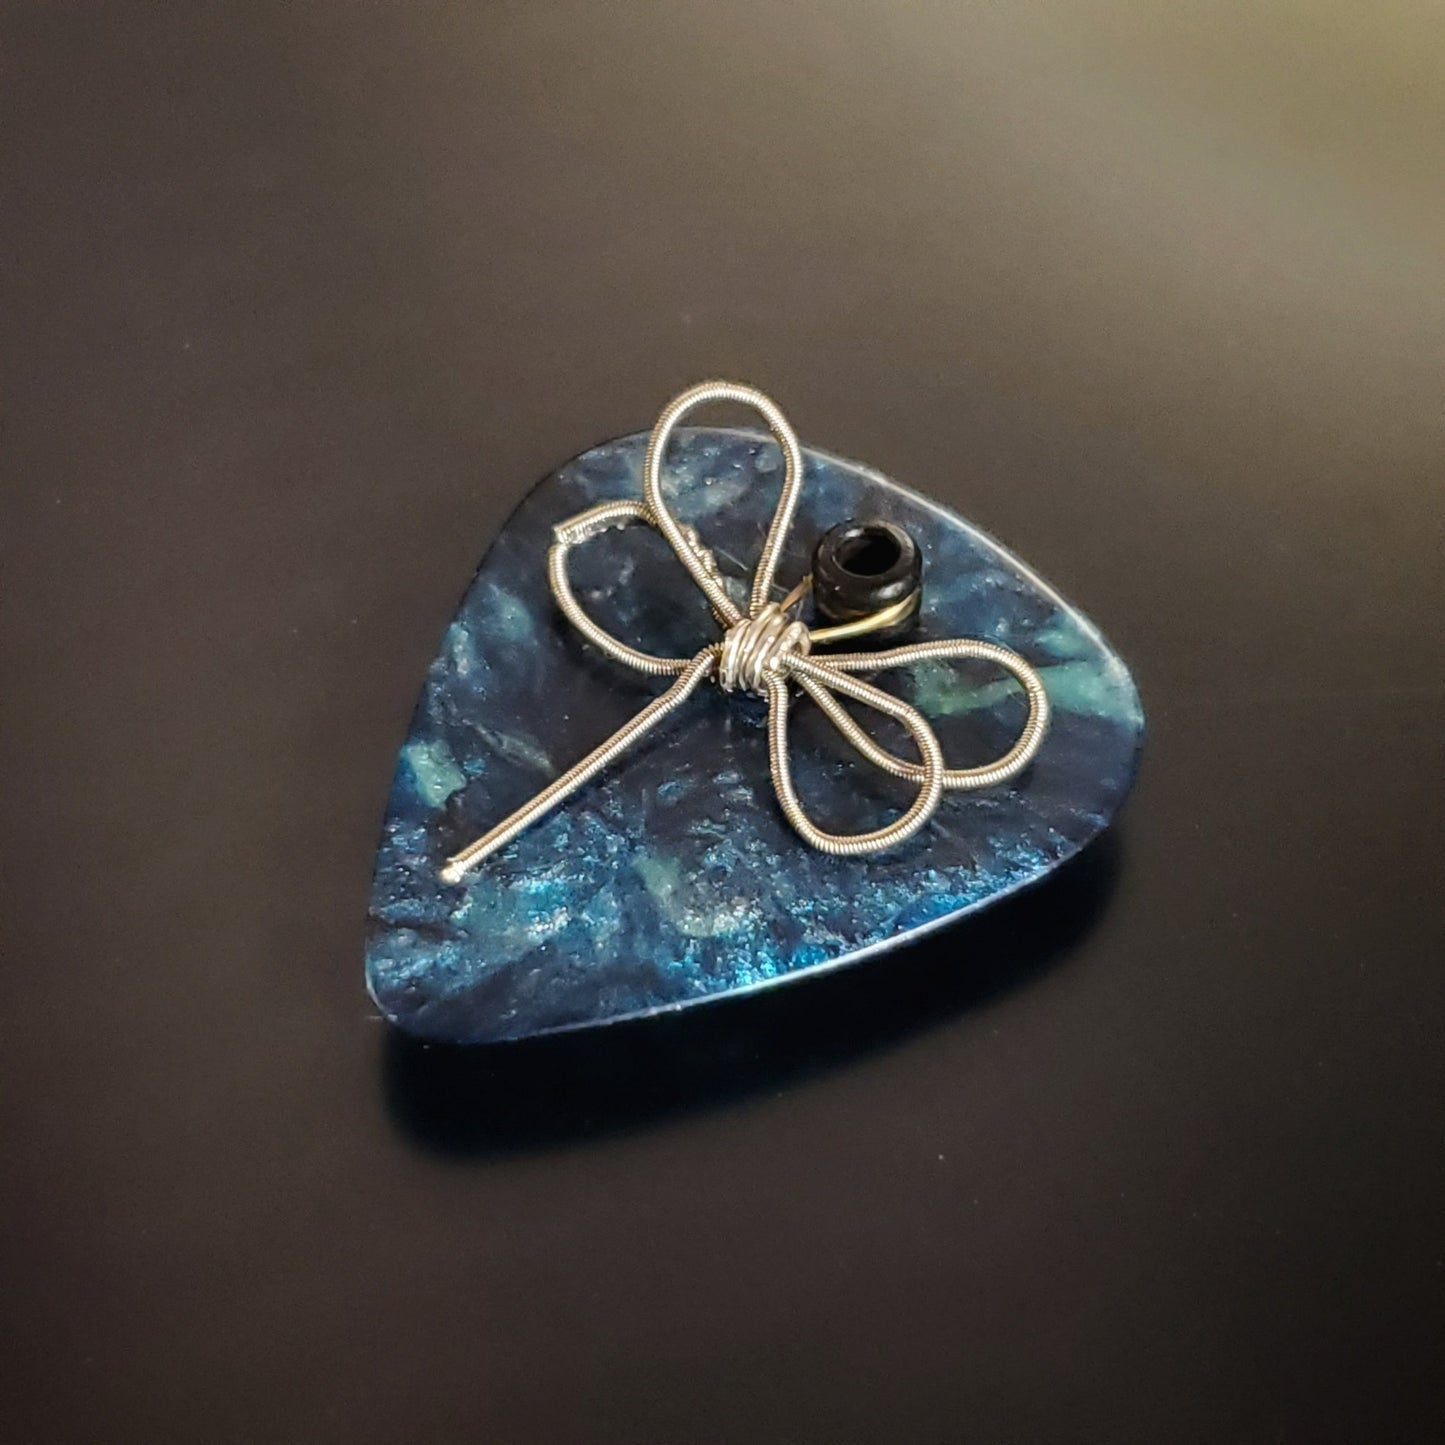 Dragonfly Guitar String and Teal Guitar Pick Magnet